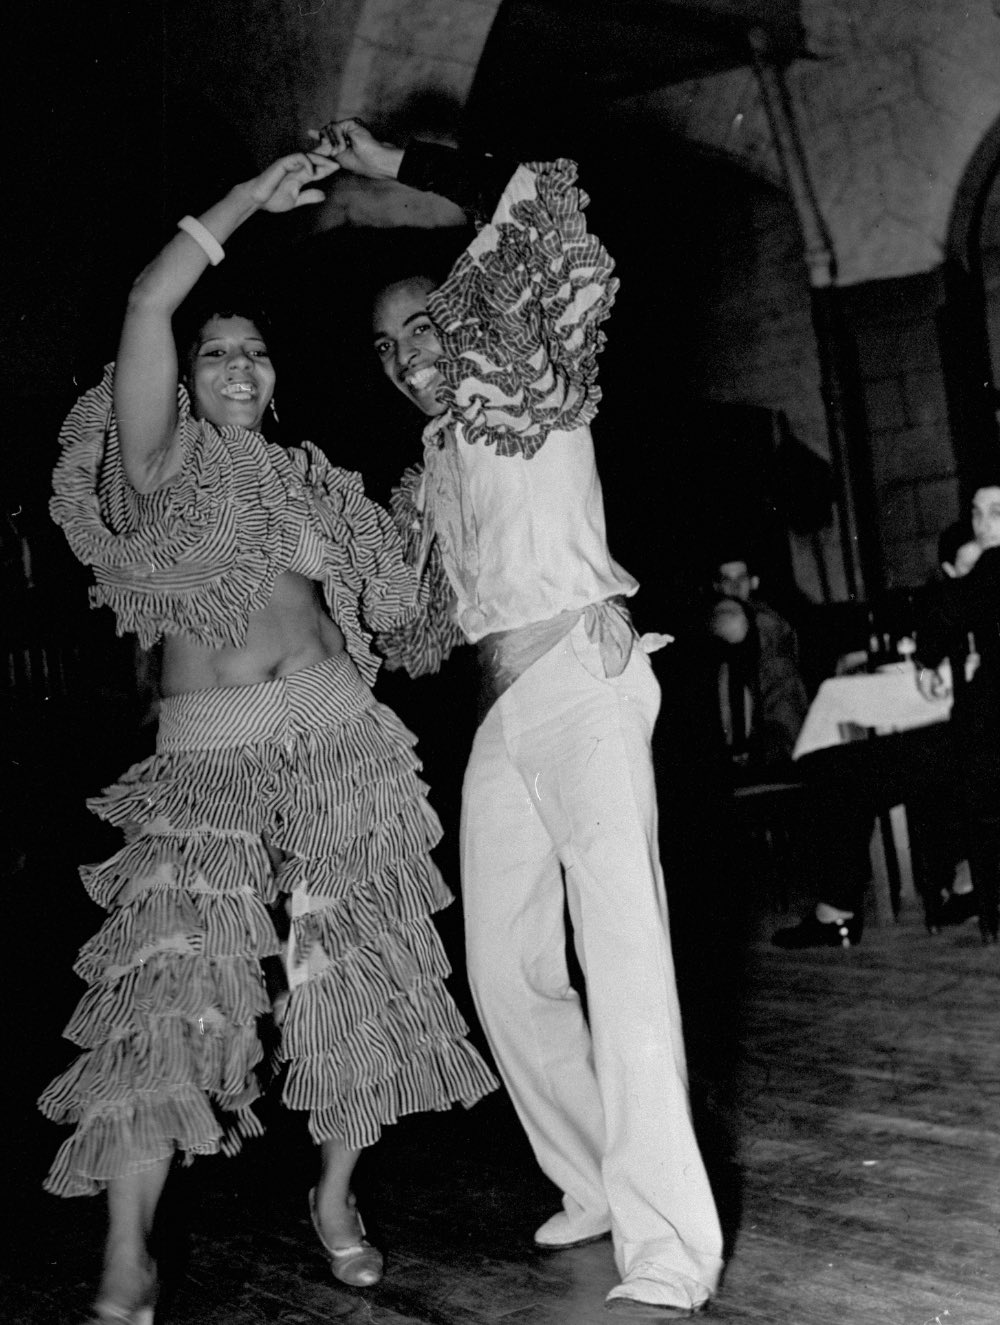 A view of people dancing at a Cuban club